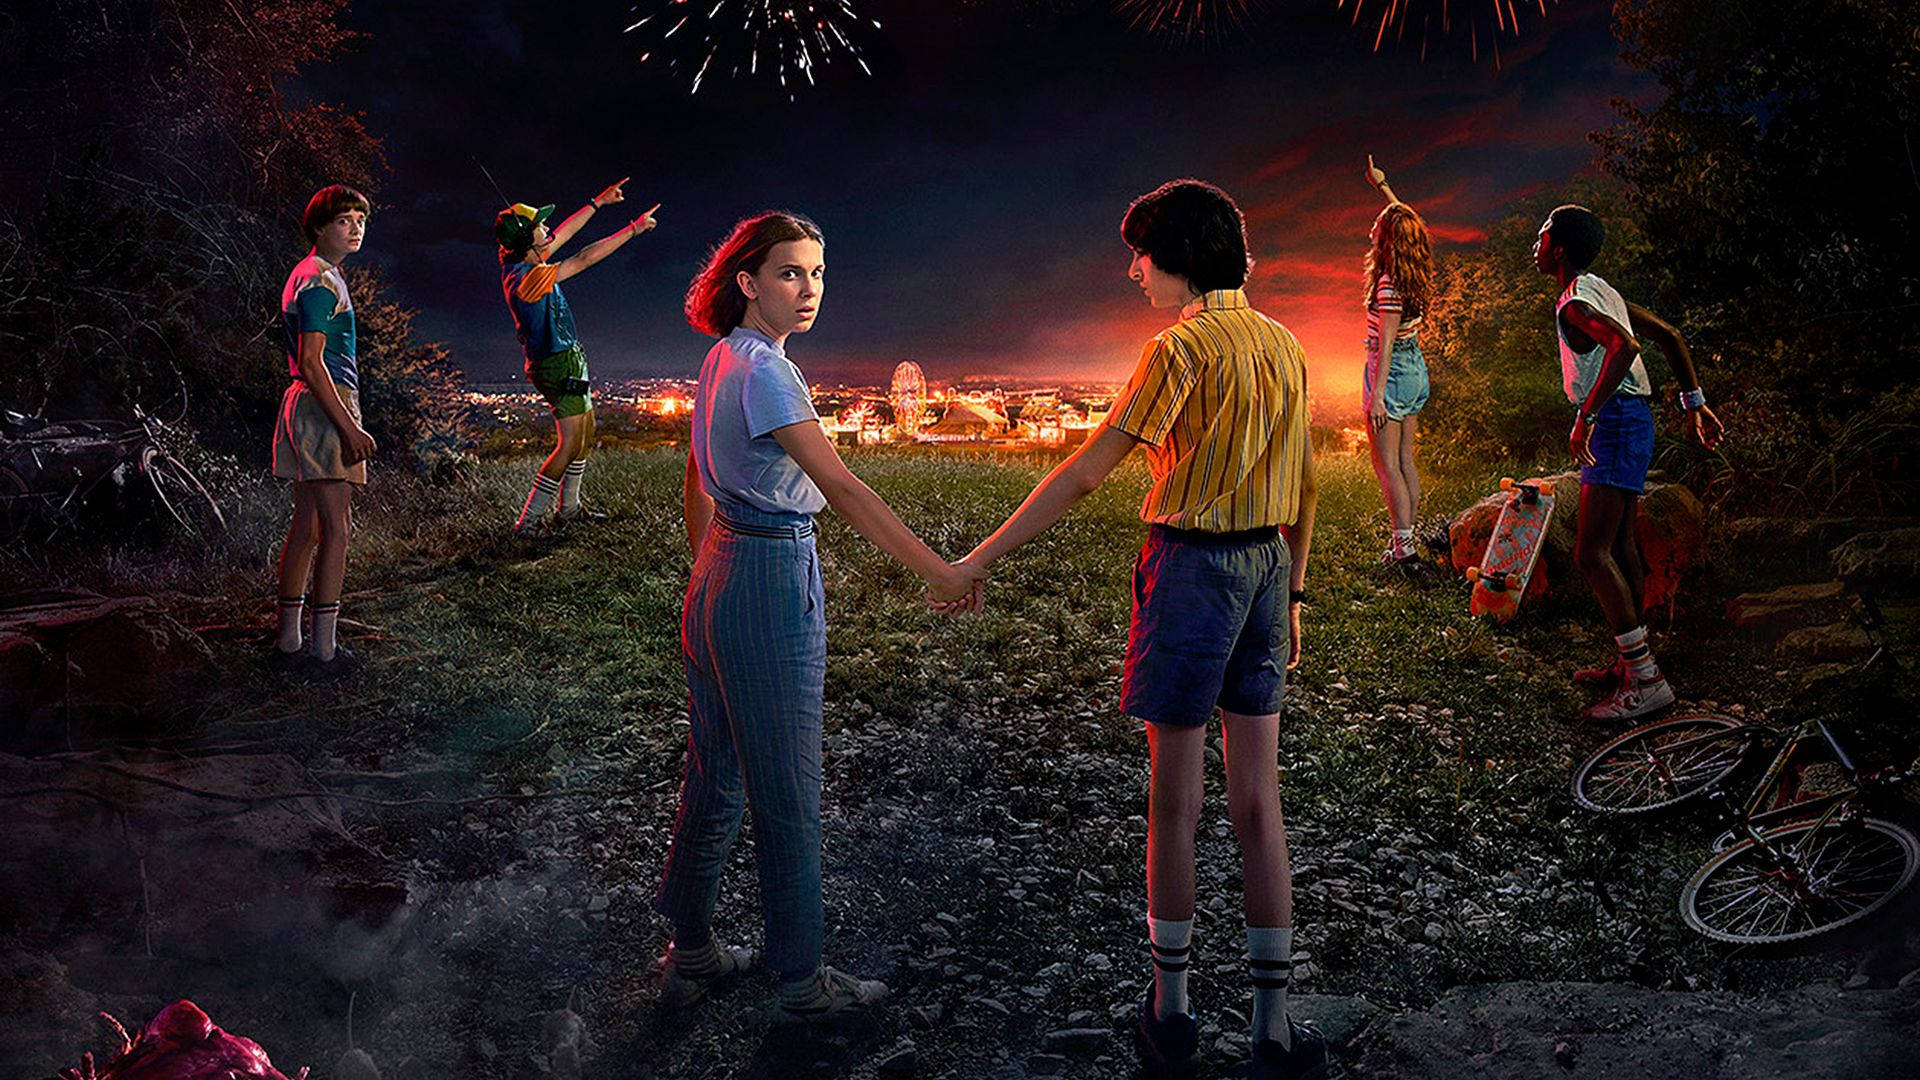 A scene from Stranger Things, where a boy and girl hold hands while looking at the night sky. - Stranger Things